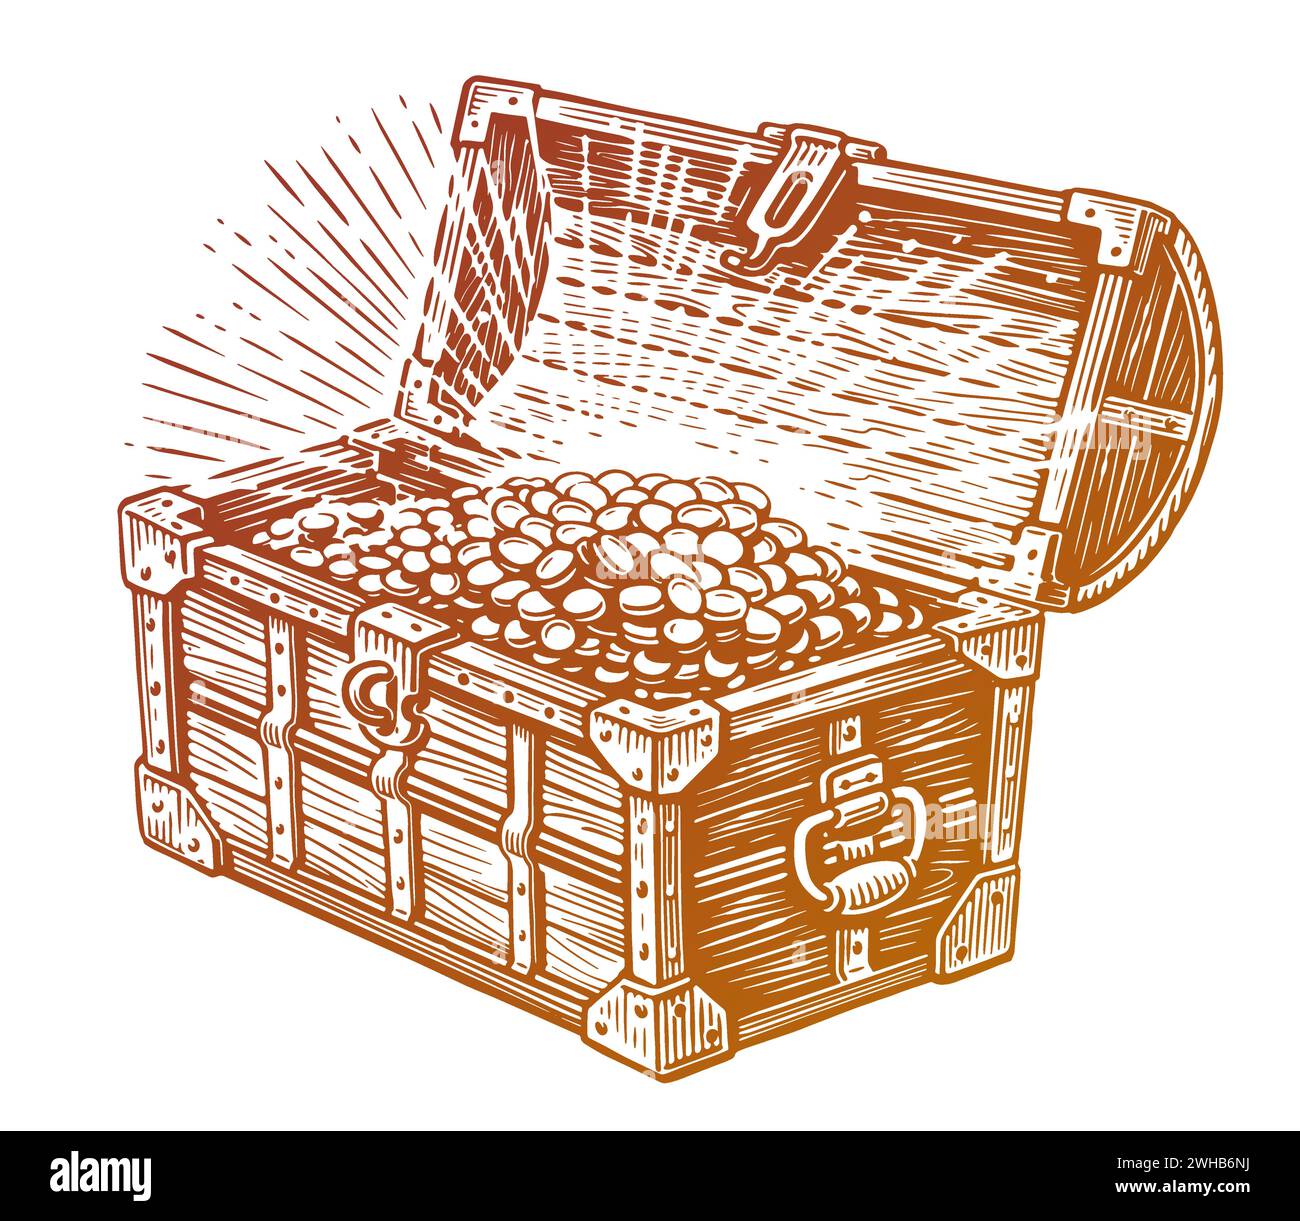 Open treasure chest full of gold coins. Hand drawn sketch vintage vector illustration Stock Vector